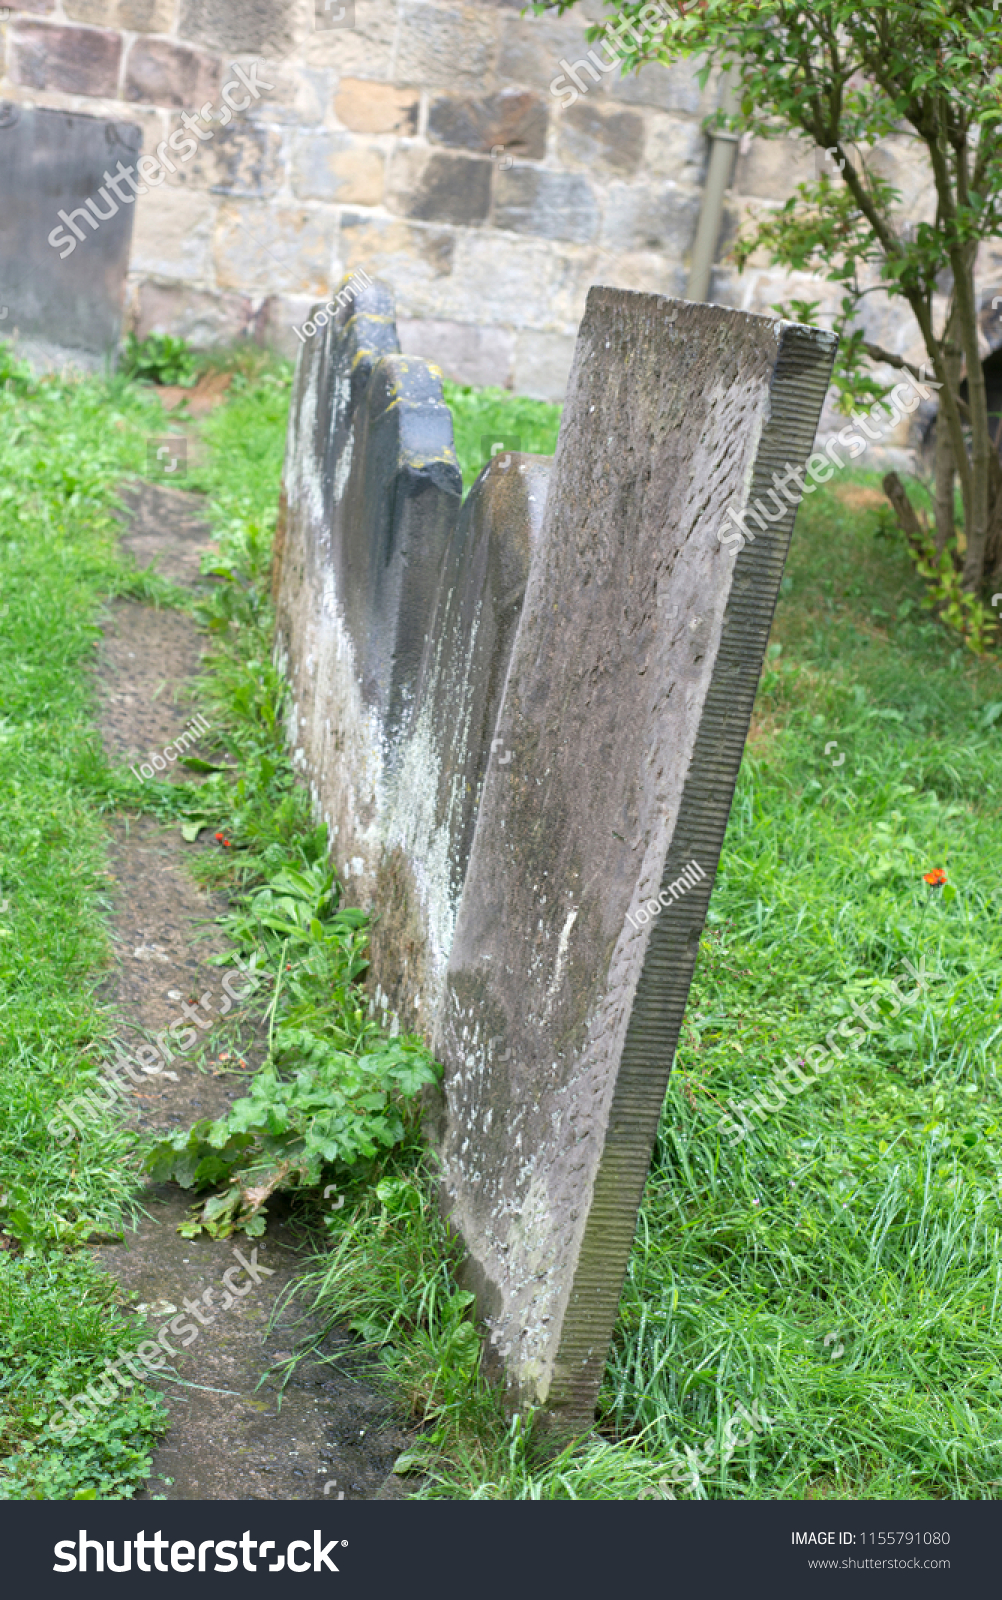 Leaning gravestones in a chruch graveyard #1155791080